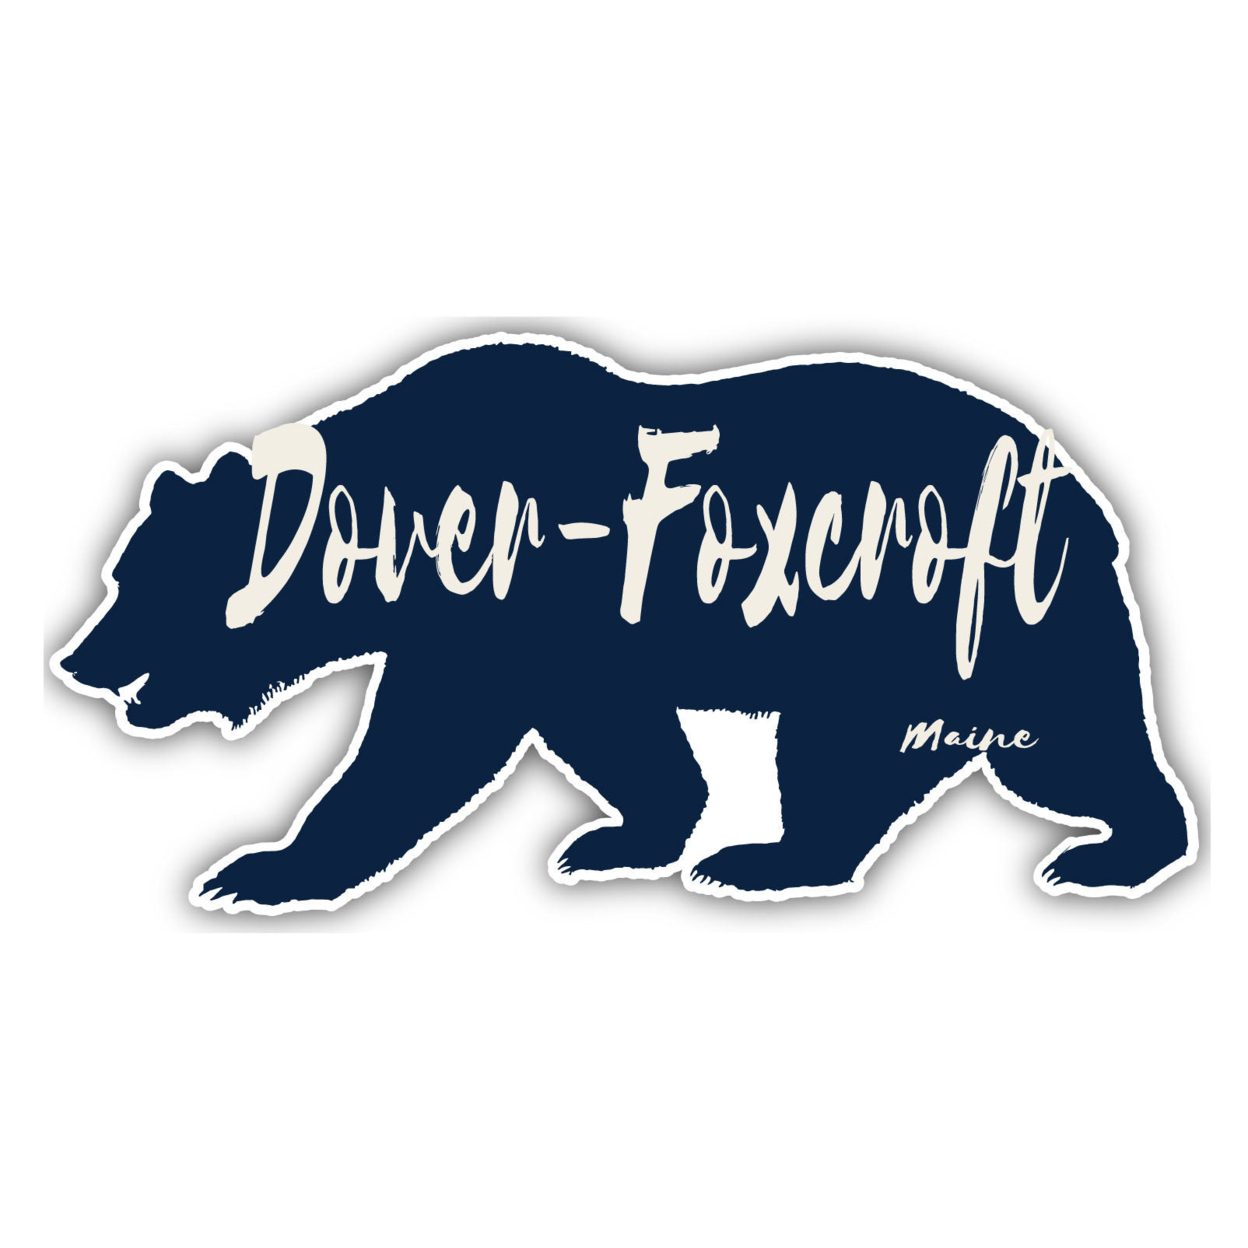 Dover-Foxcroft Maine Souvenir Decorative Stickers (Choose Theme And Size) - 4-Pack, 4-Inch, Bear